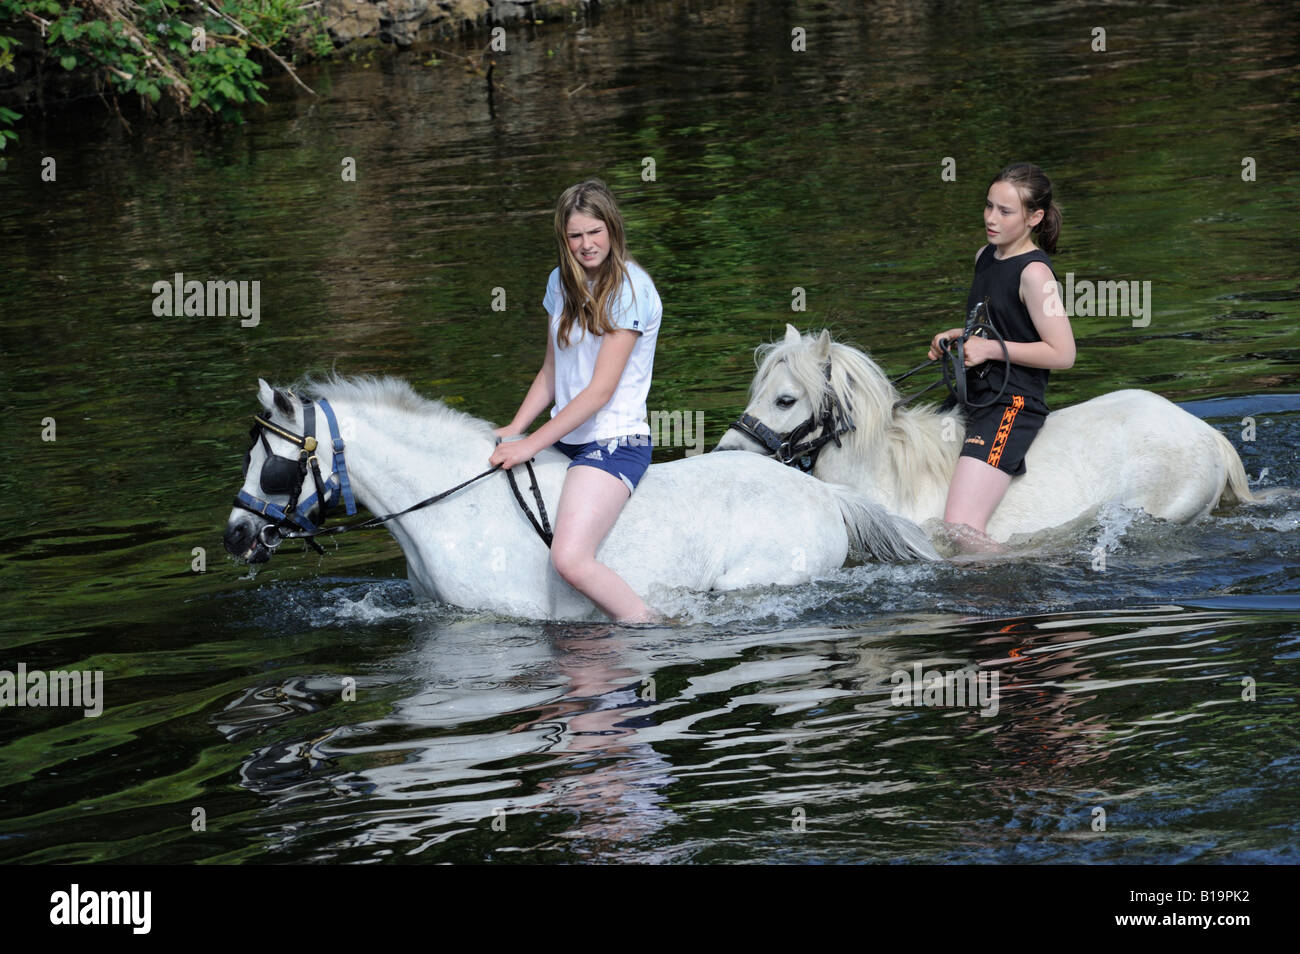 Two gypsy traveller girls riding ponies bareback in River Eden. Appleby Horse Fair. Appleby-in-Westmorland, Cumbria, England. Stock Photo